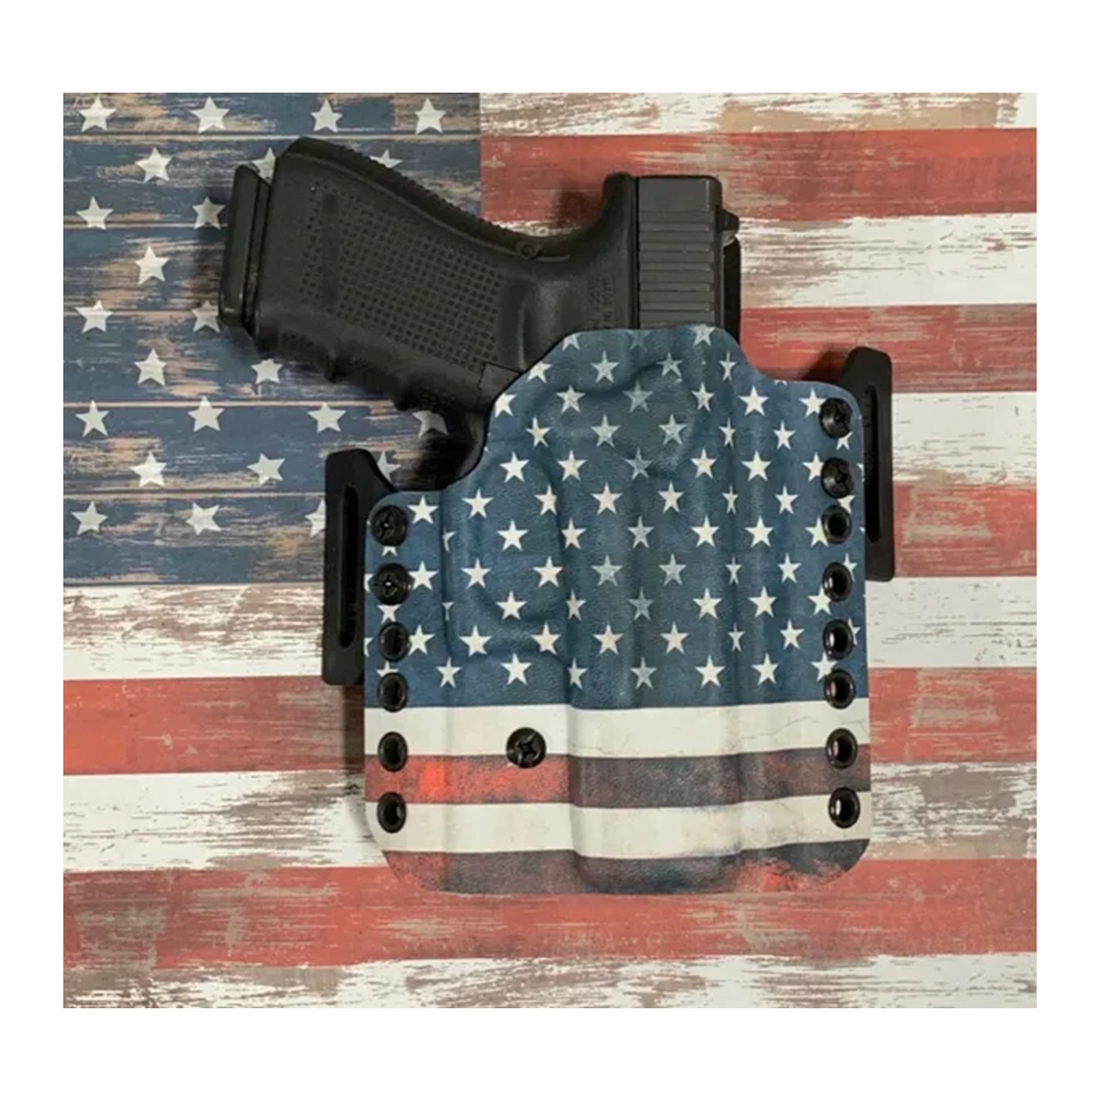 Kimber OWB Holsters